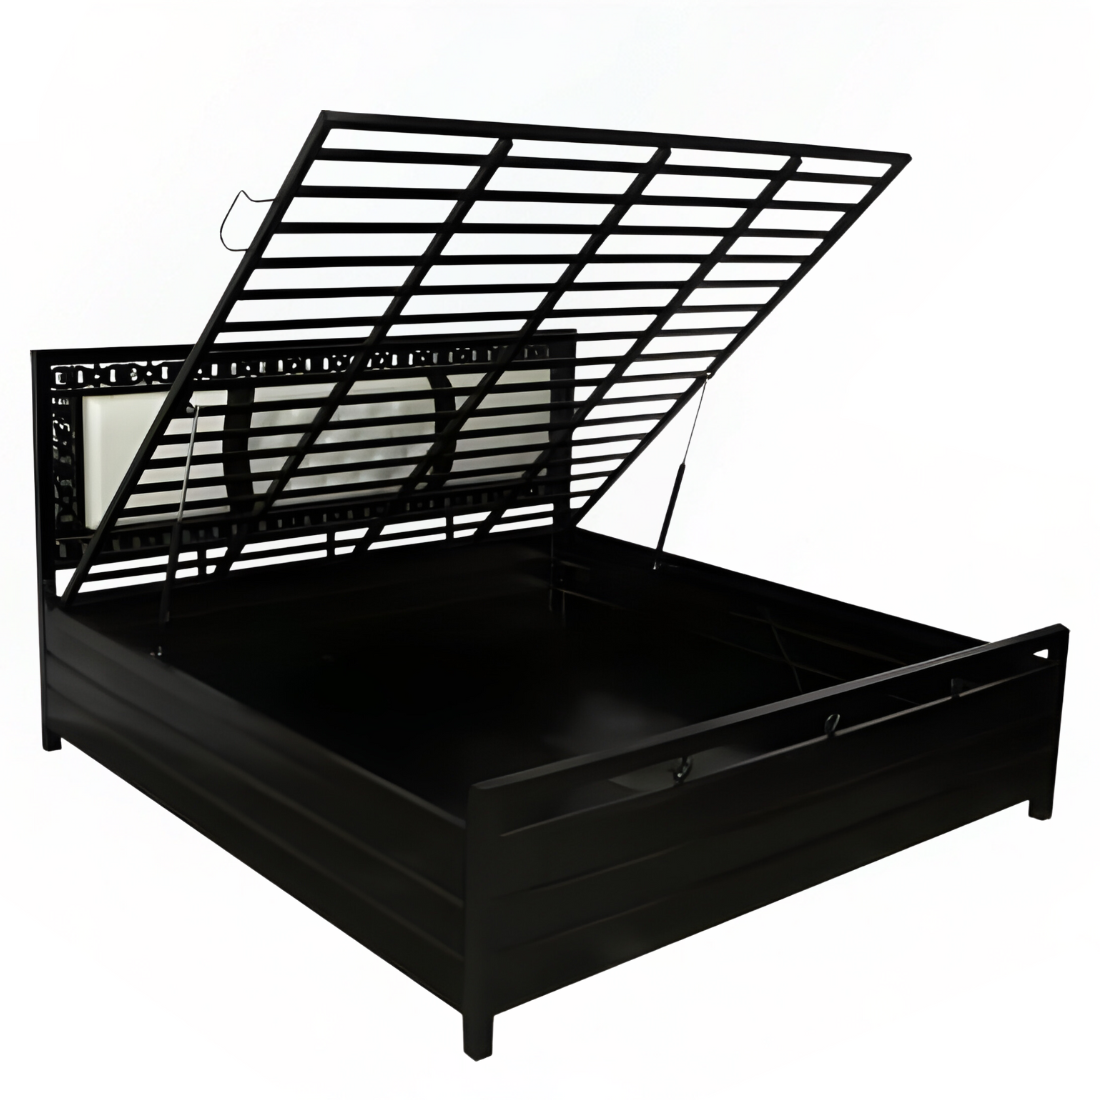 Bostan Hydraulic Storage Double Metal Bed with White Cushion Headrest (Color - Black)